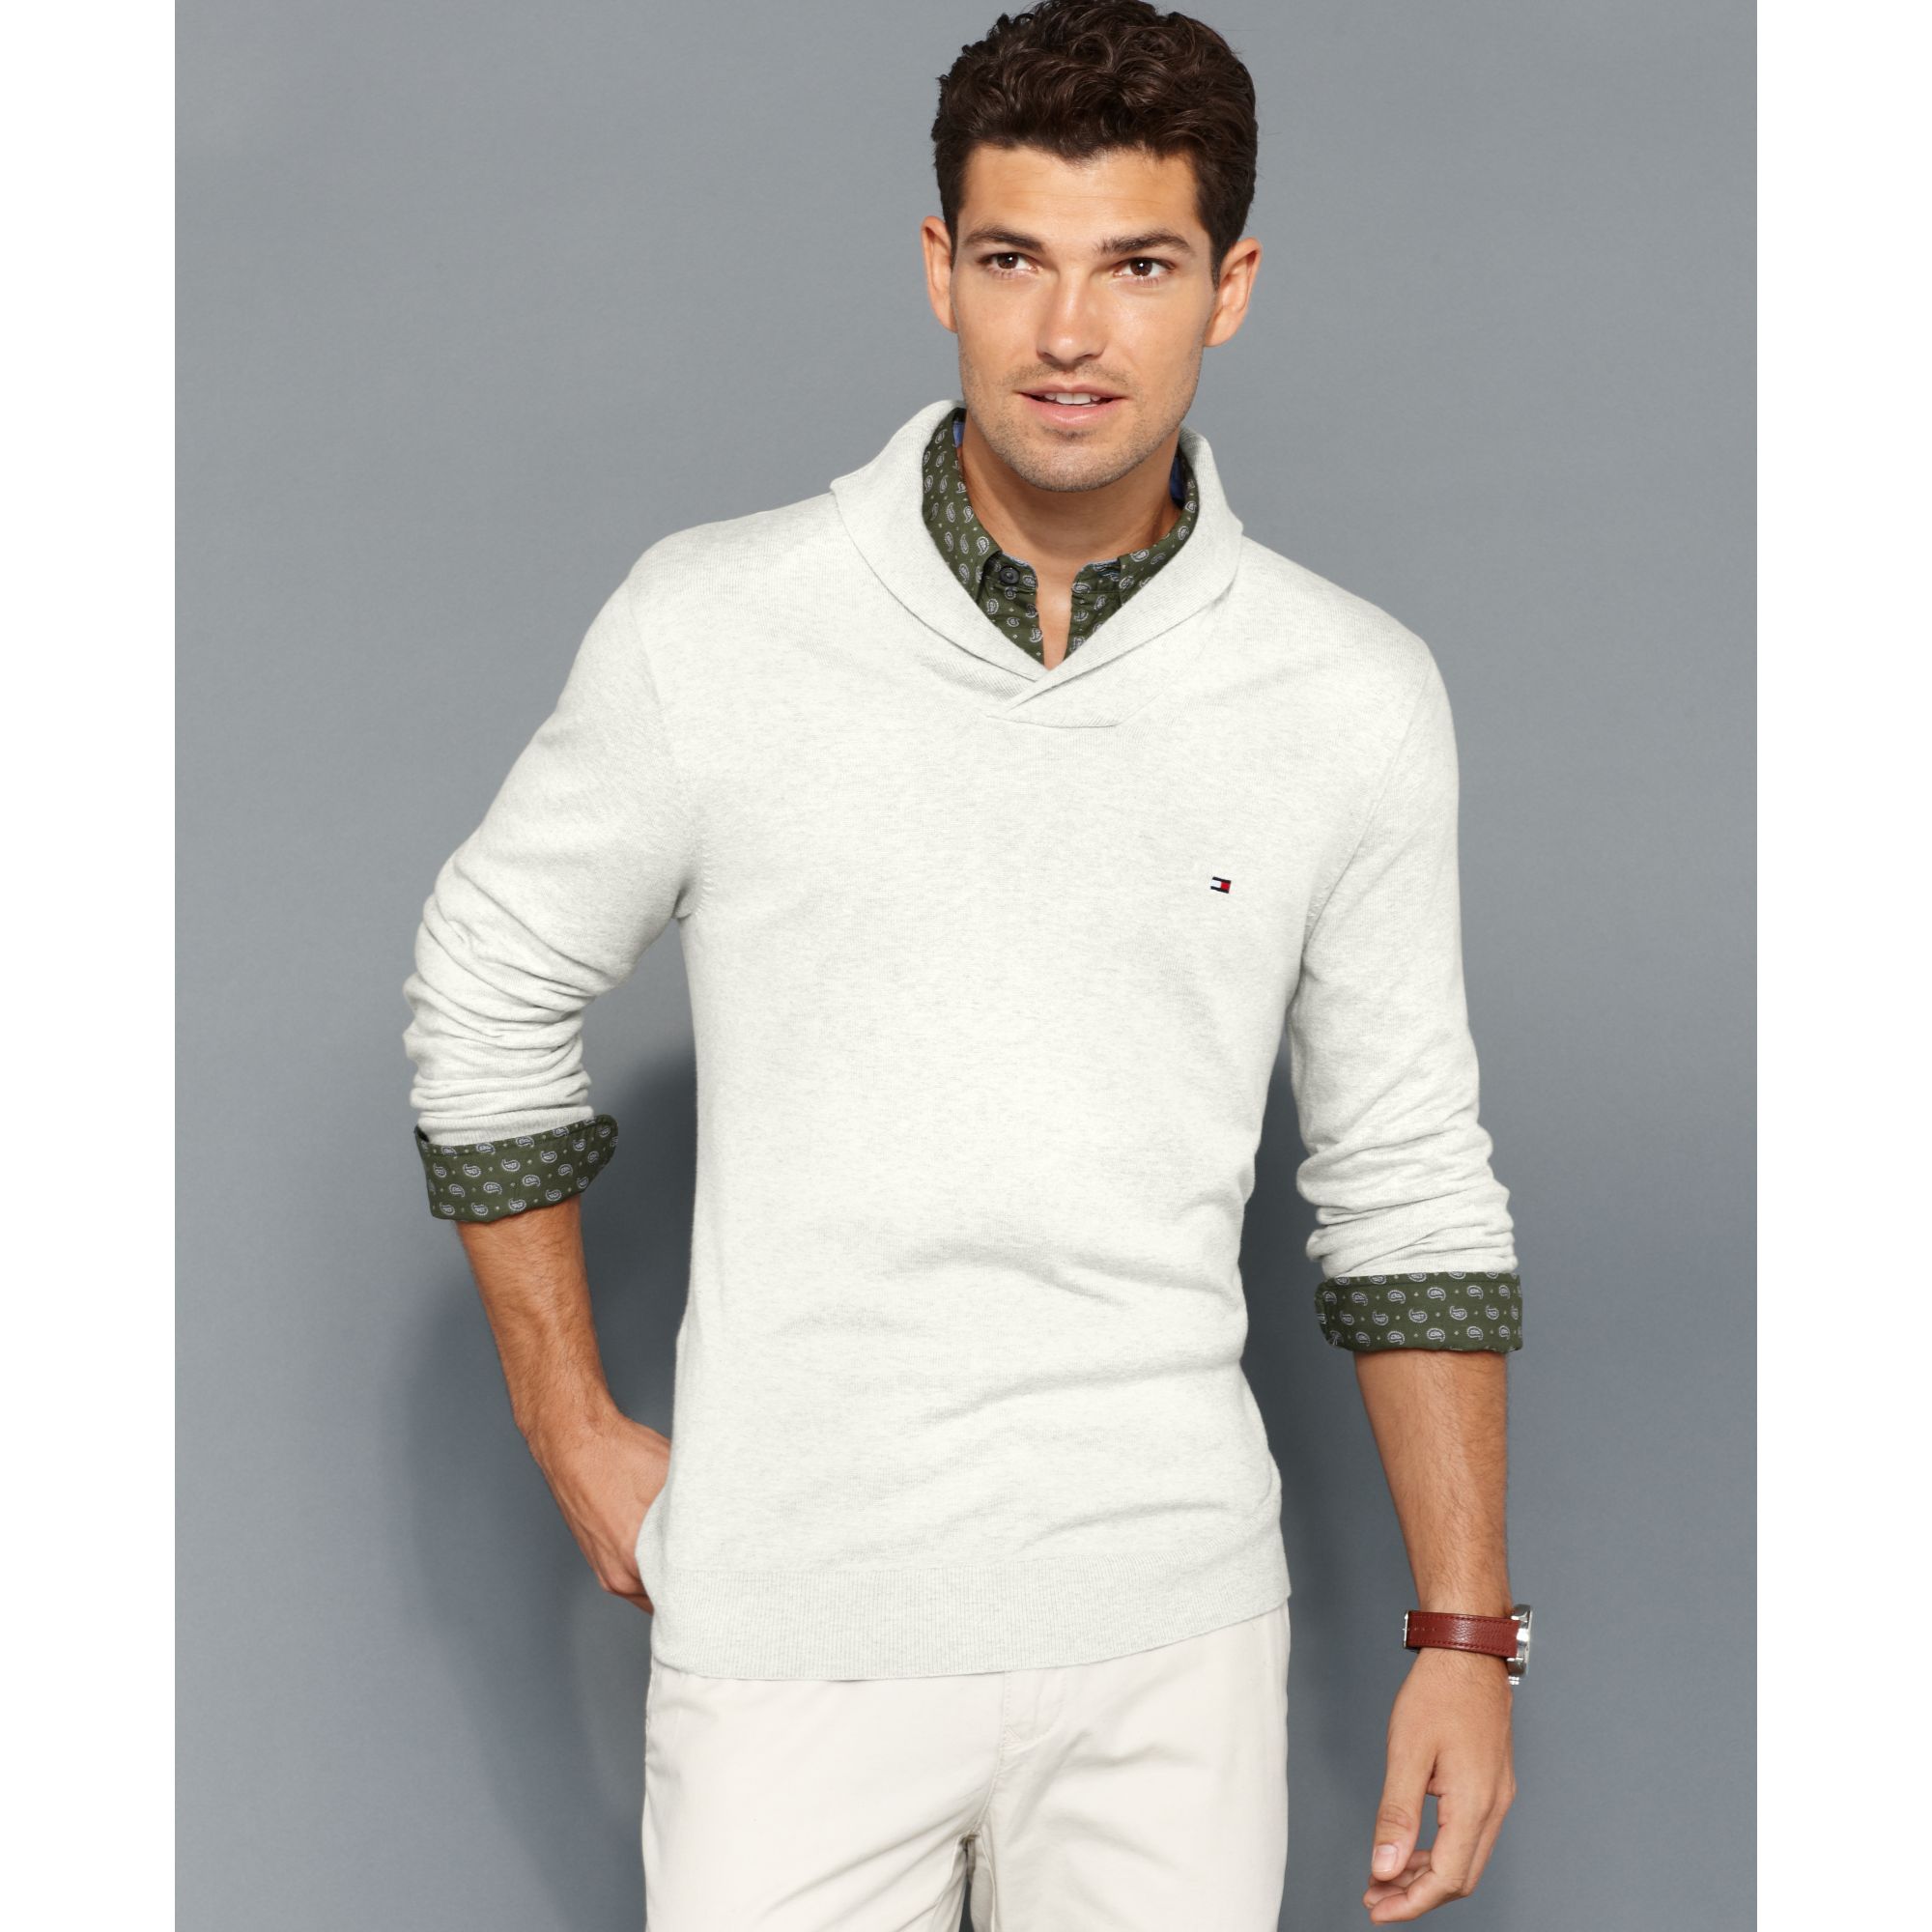 Lyst - Tommy hilfiger American Shawl Collar Sweater in White for Men